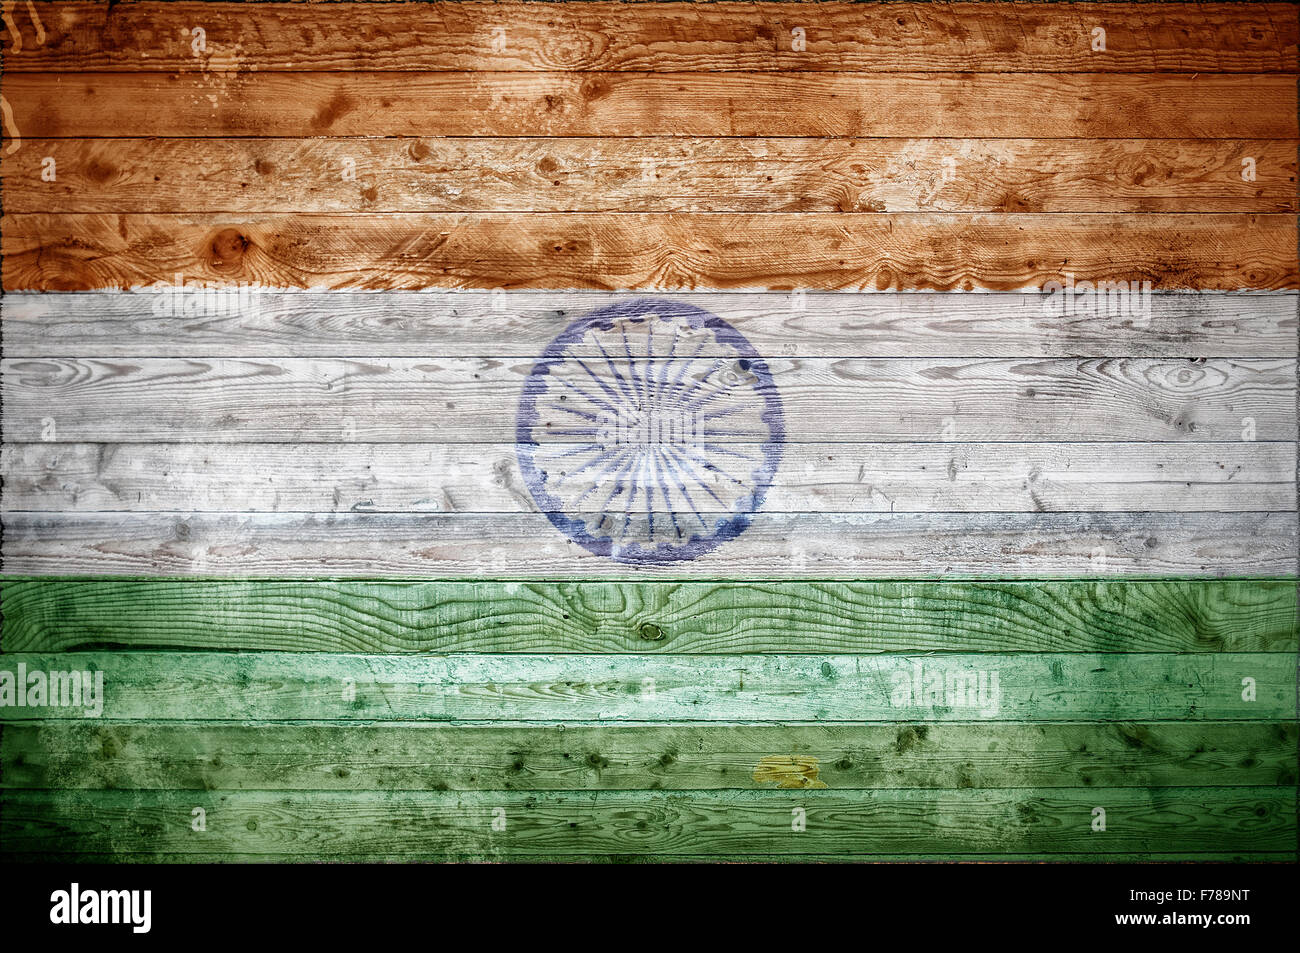 A vignetted background image of the flag of India painted onto wooden boards of a wall or floor. Stock Photo